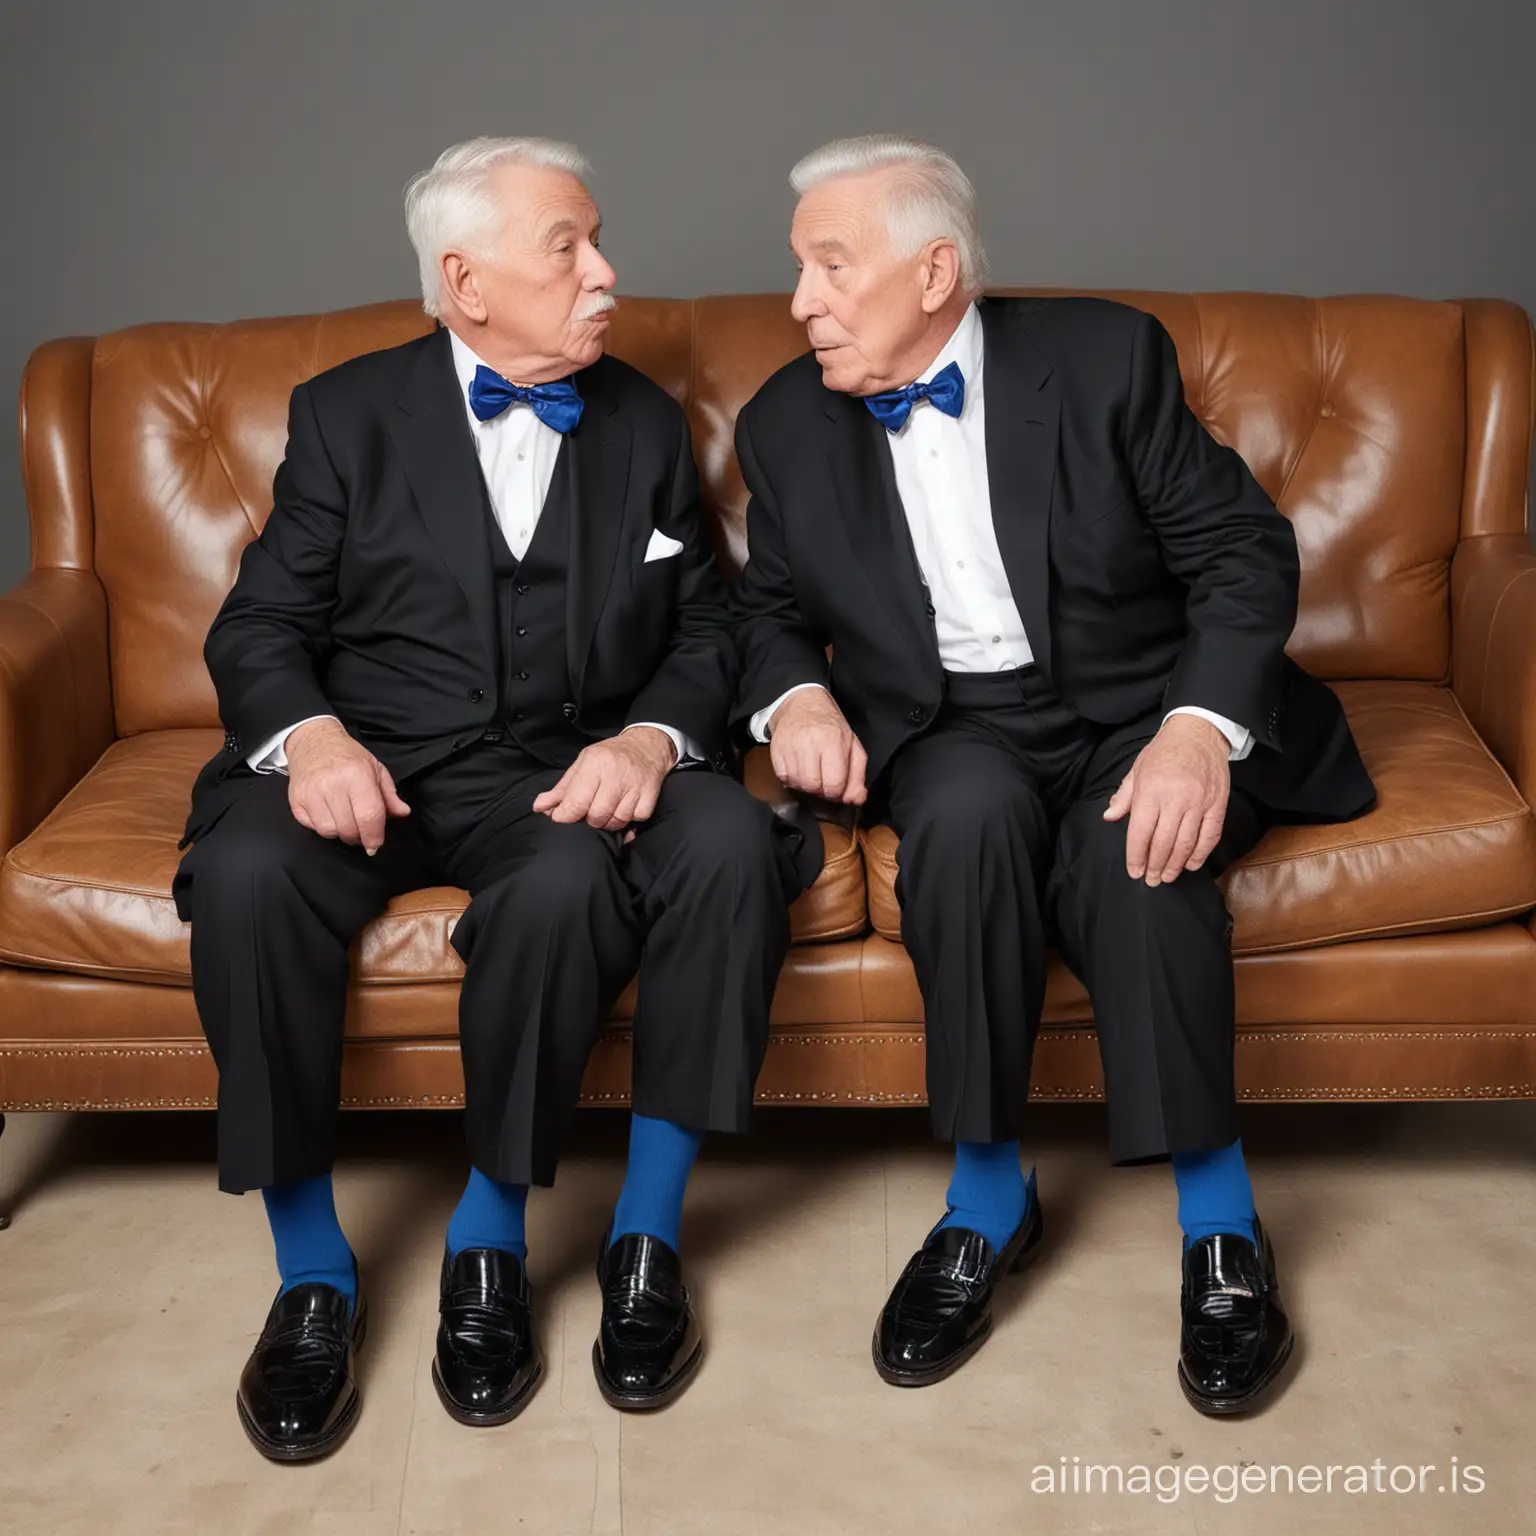 Elderly-American-Men-in-Formal-Attire-Sharing-a-Tender-Moment-on-Office-Couch